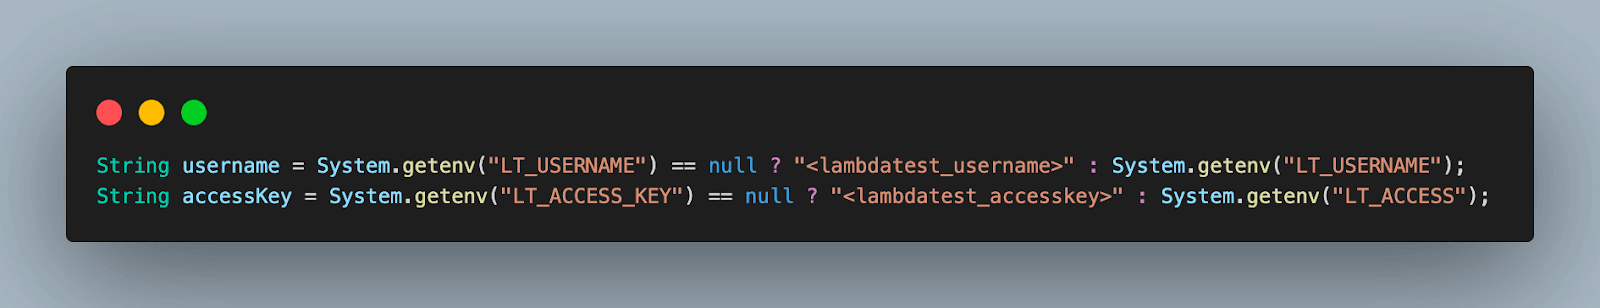  Fetch your username and access key for the LambdaTest account